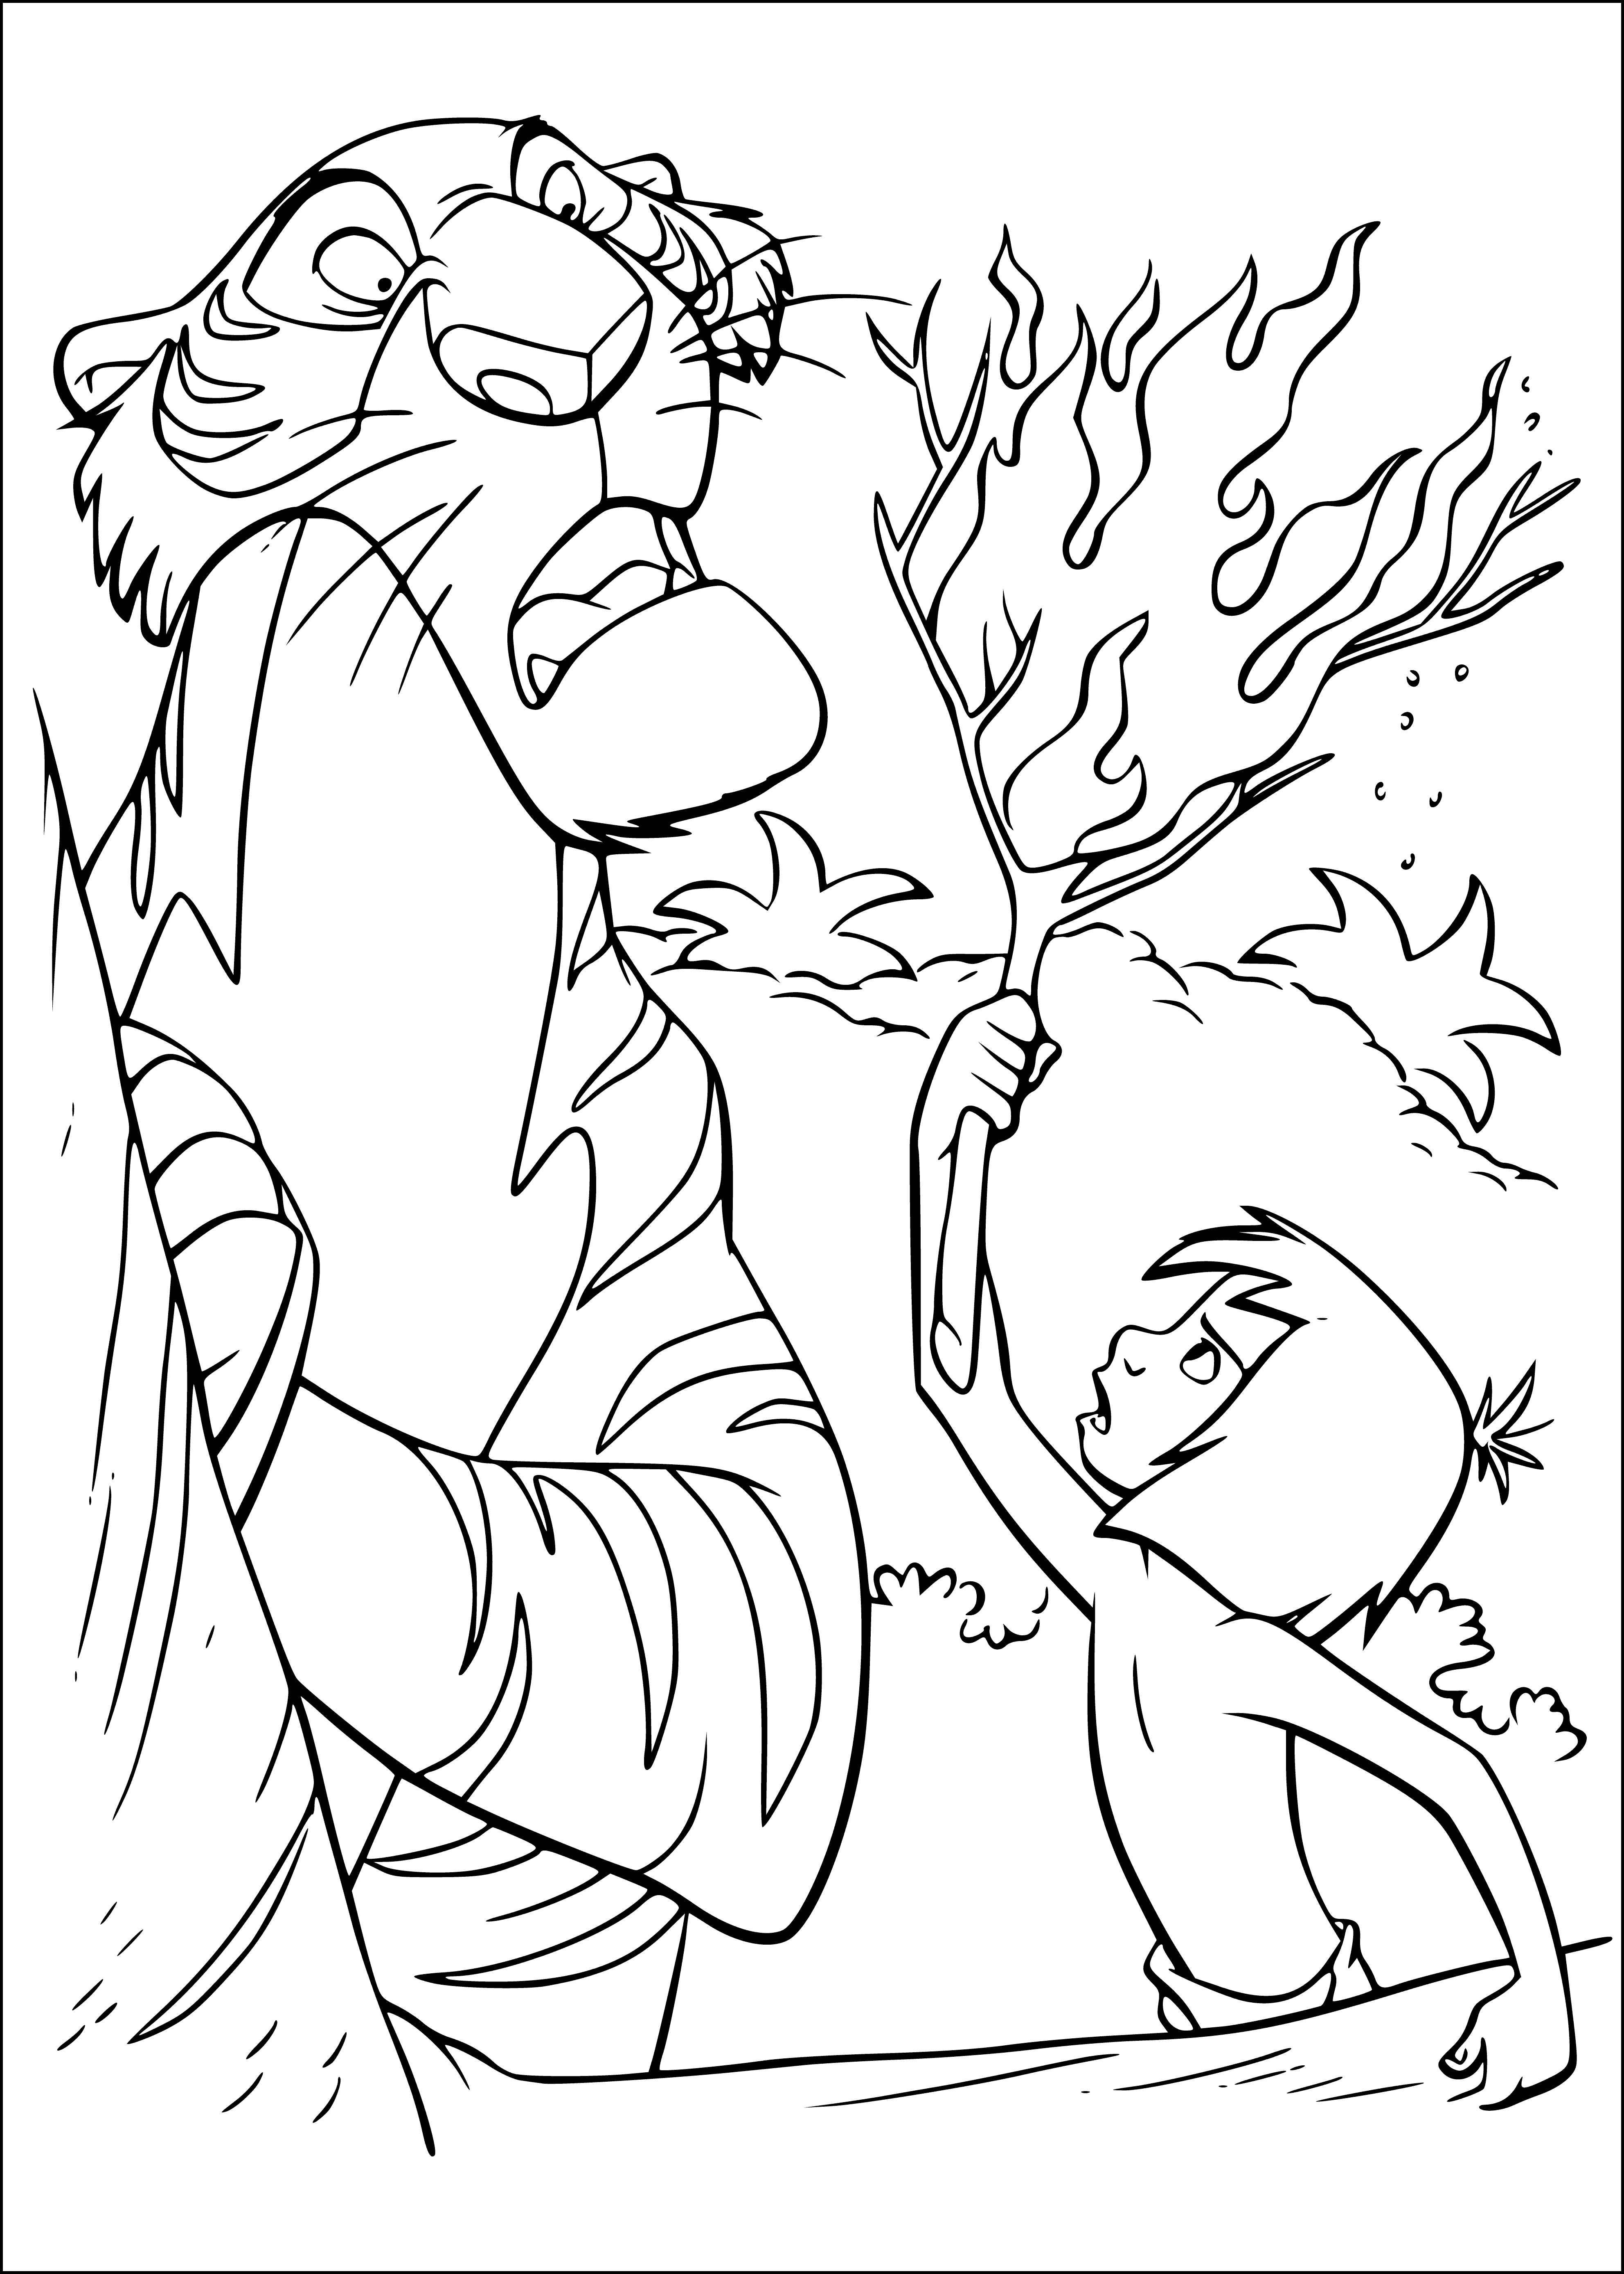 Mowgli with fire coloring page